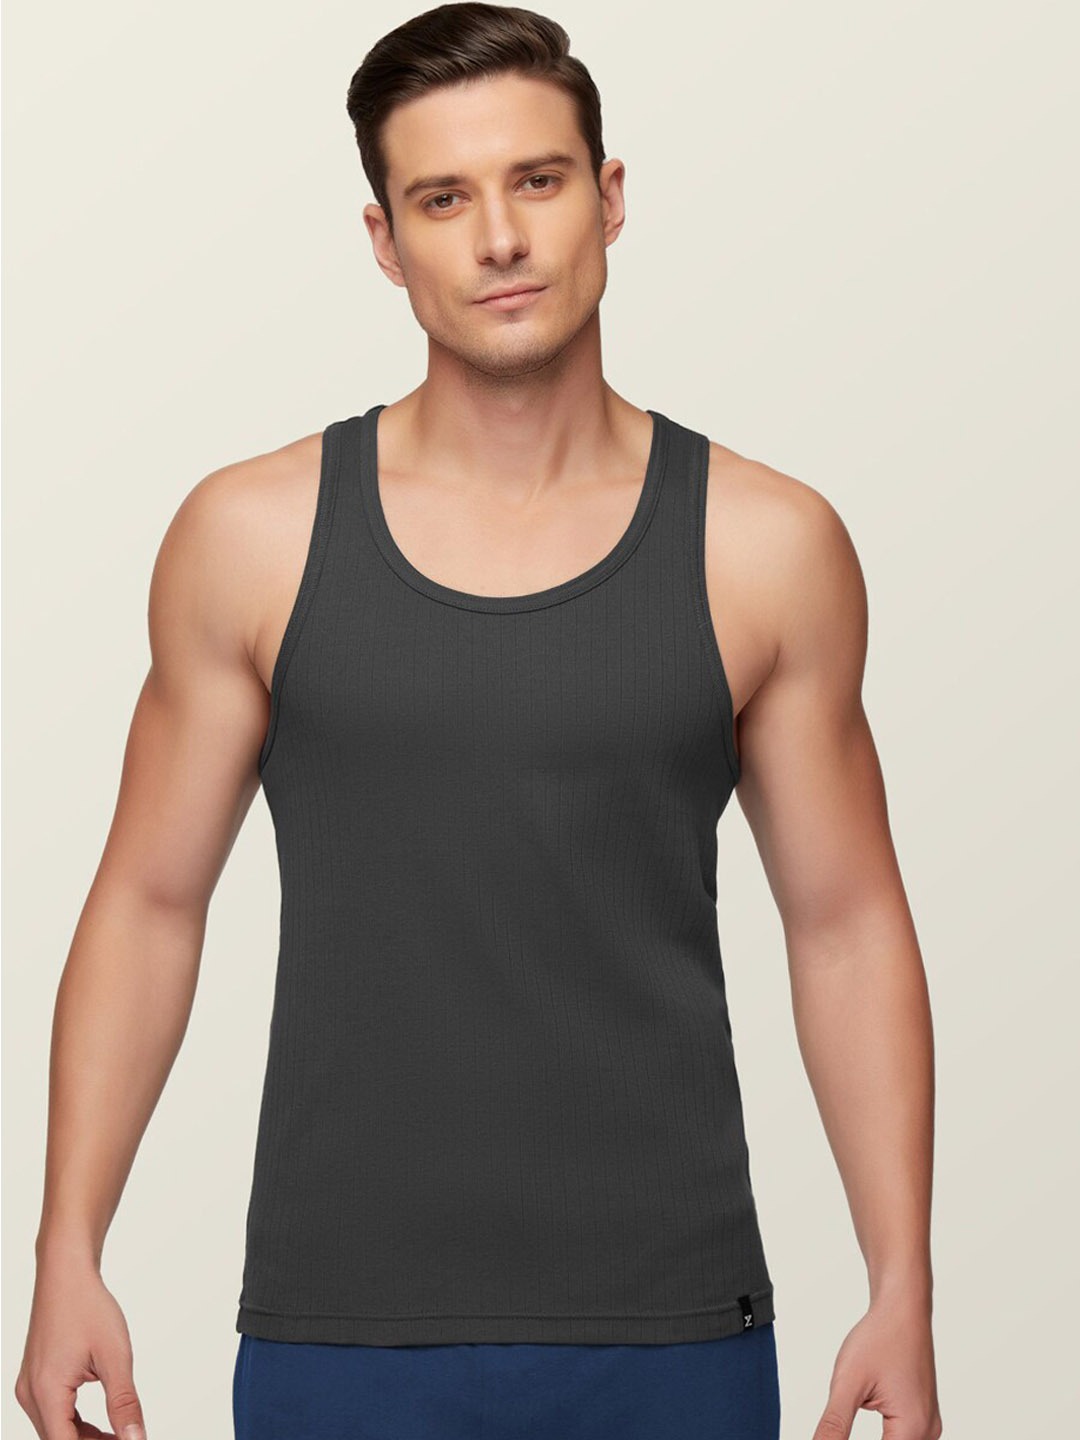 Clothing Innerwear Vests | XYXX Men Charcoal Grey Anti-Microbial Super Combed Cotton Round Neck Ribbed Vest - XH28413